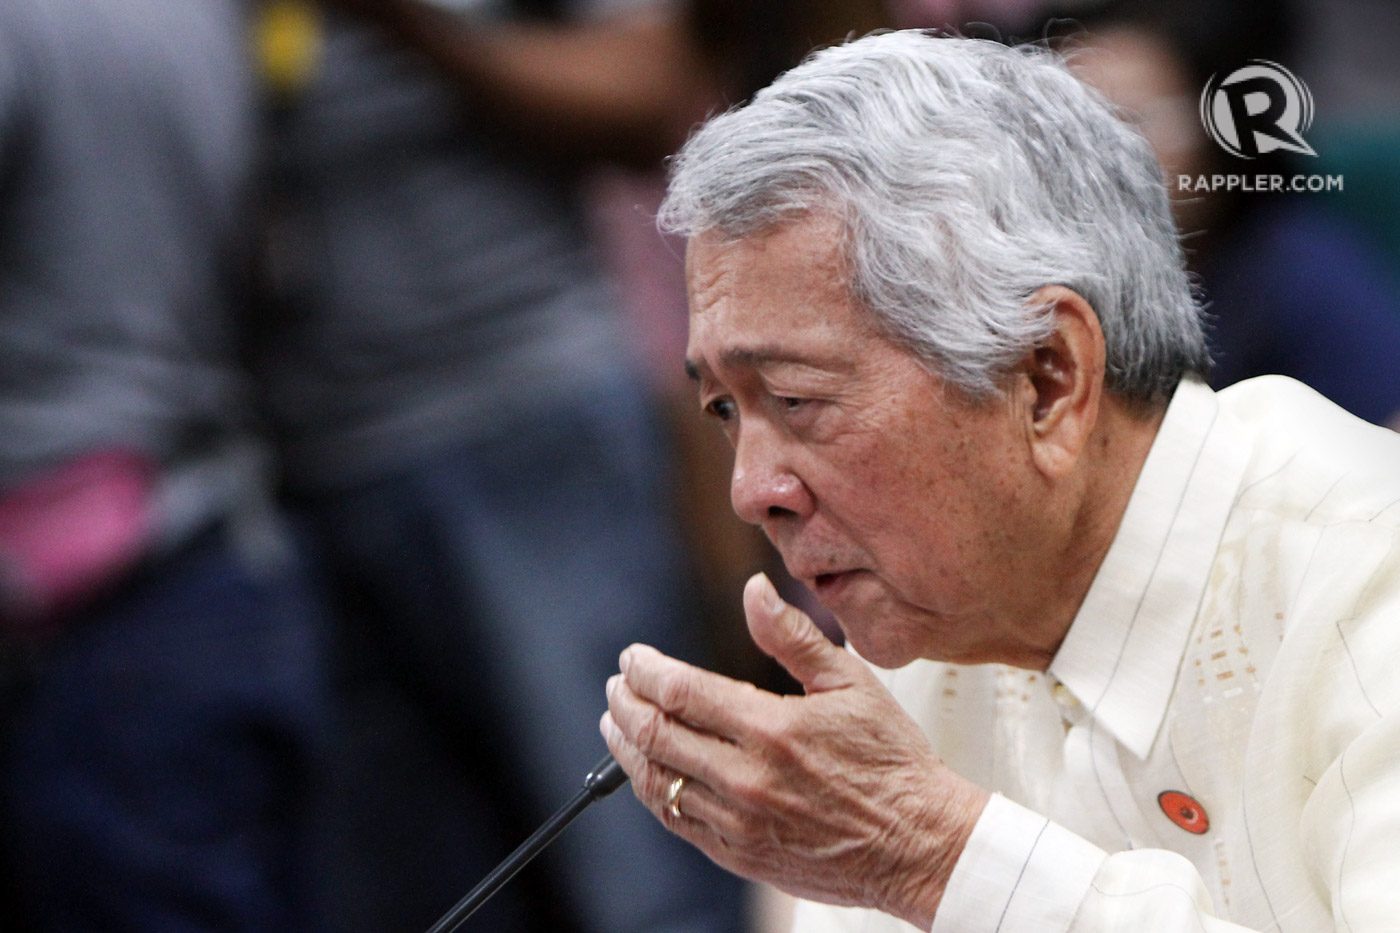 U.S. citizen before? Yasay refuses to say yes or no